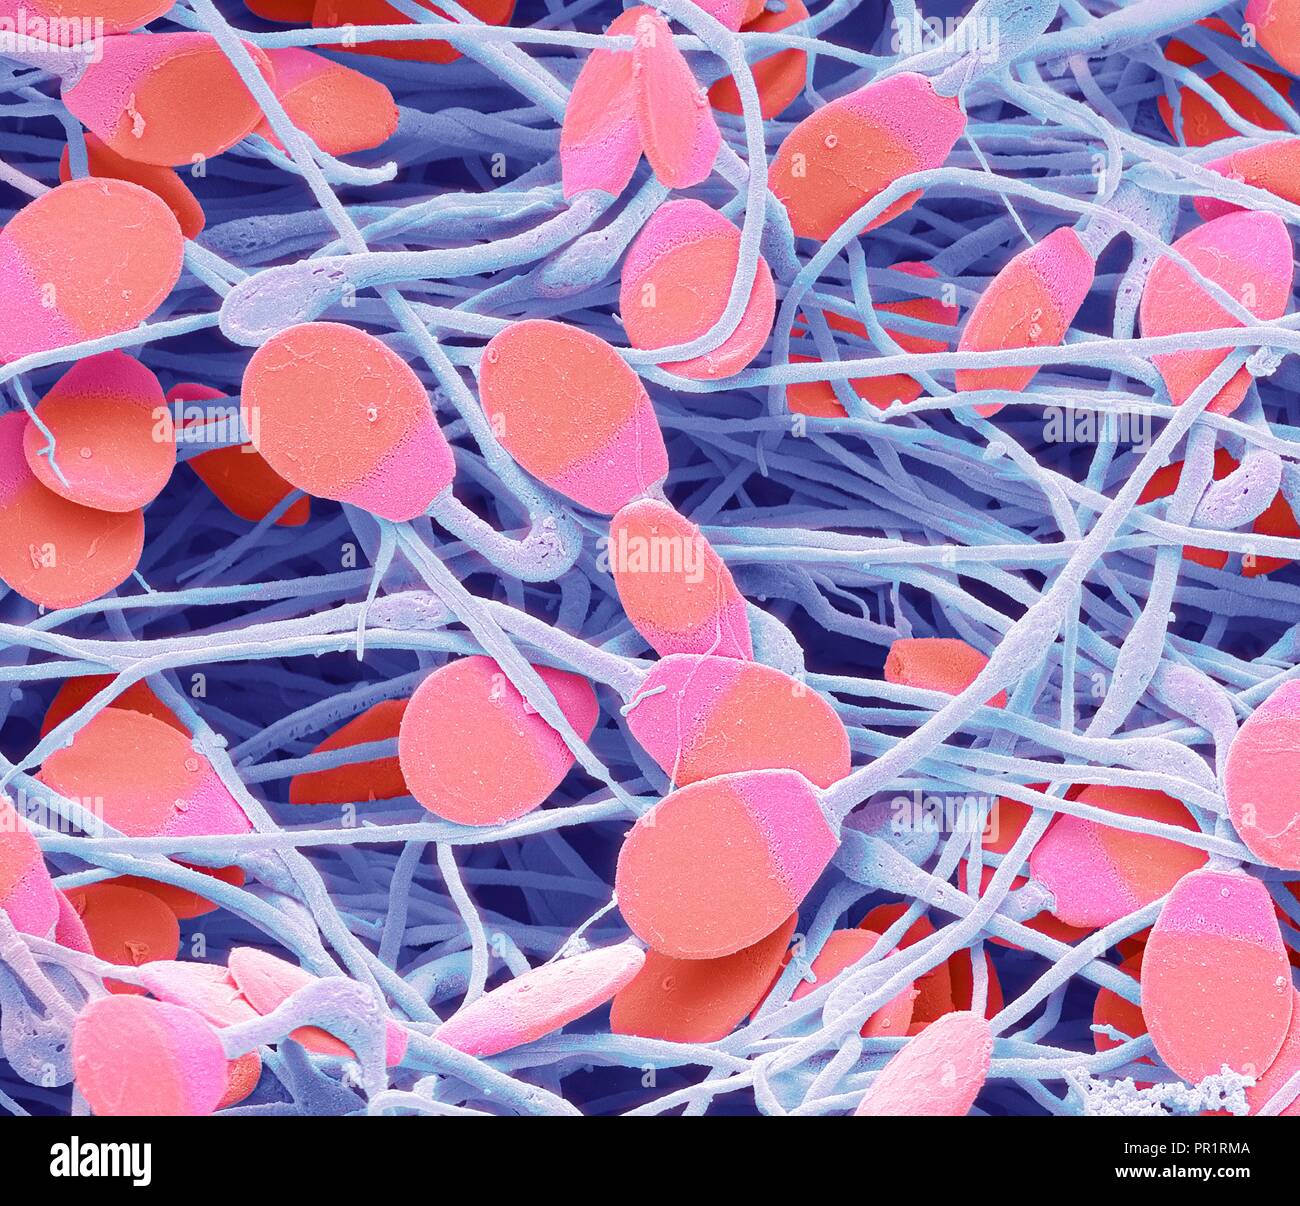 Pig sperm. Coloured scanning electron micrograph (SEM) of immature pig sperm from the epididymis. This immature sperm is characterised by a small amount of unshed residual cytoplasm below the head. The epididymis is a 7 metre long coiled tube that lies behind each testis, receiving sperm from them. The sperm mature as they pass slowly through this tube. Magnification: x4000 when printed at 10 centimetres wide. Stock Photo